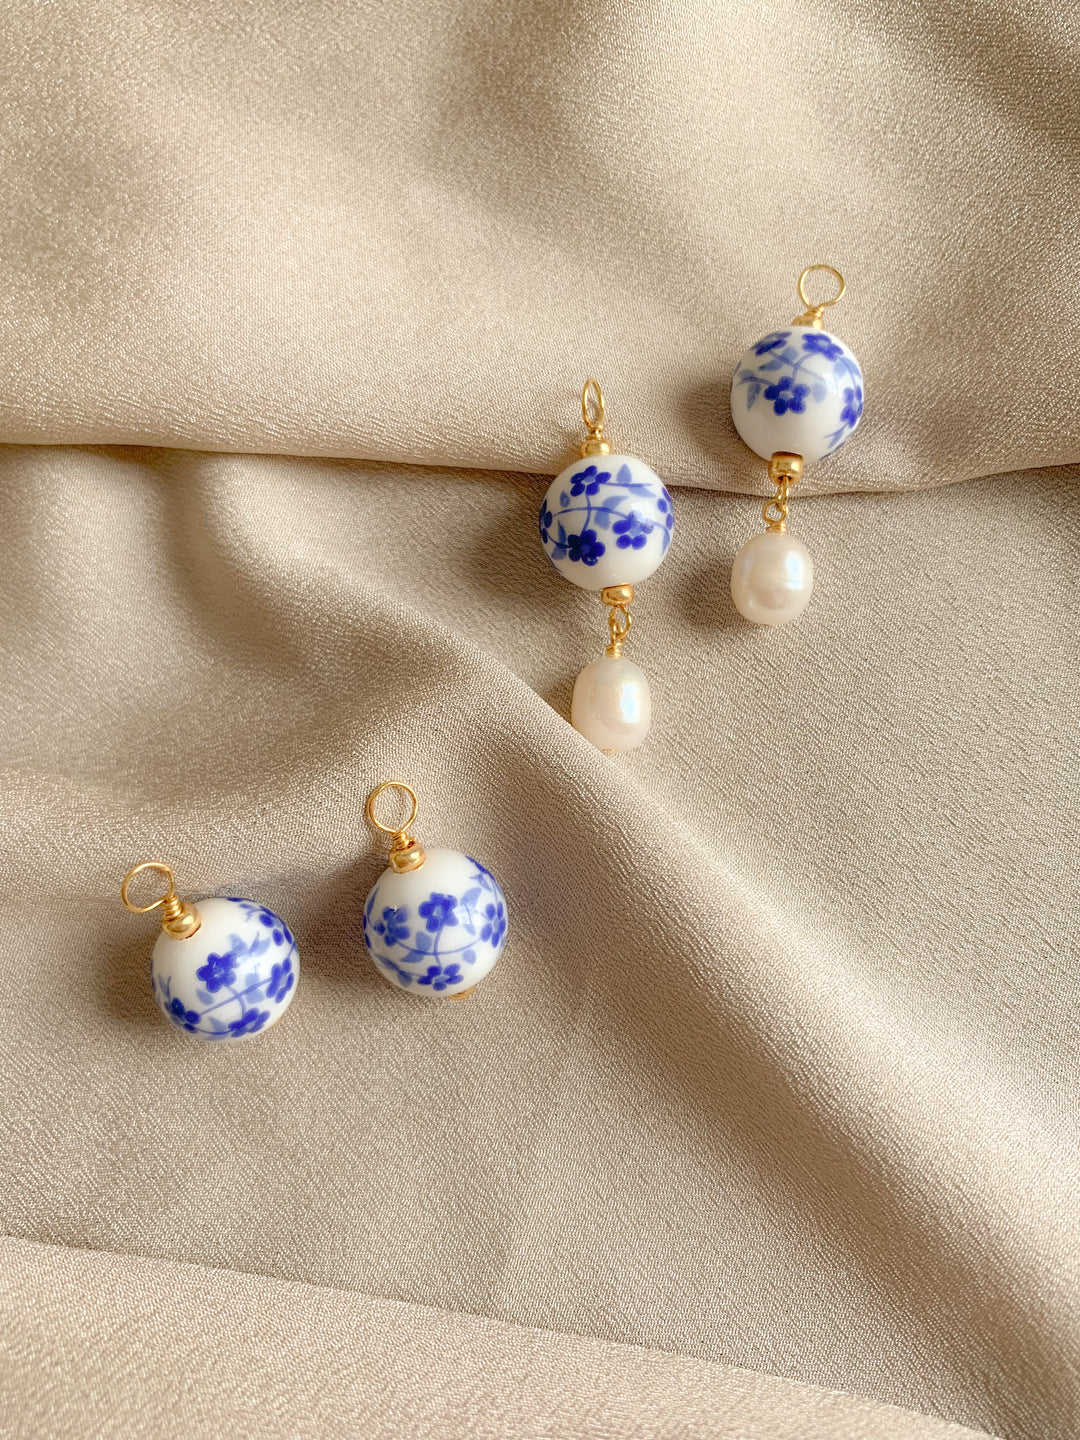 Delft Inspired Charms